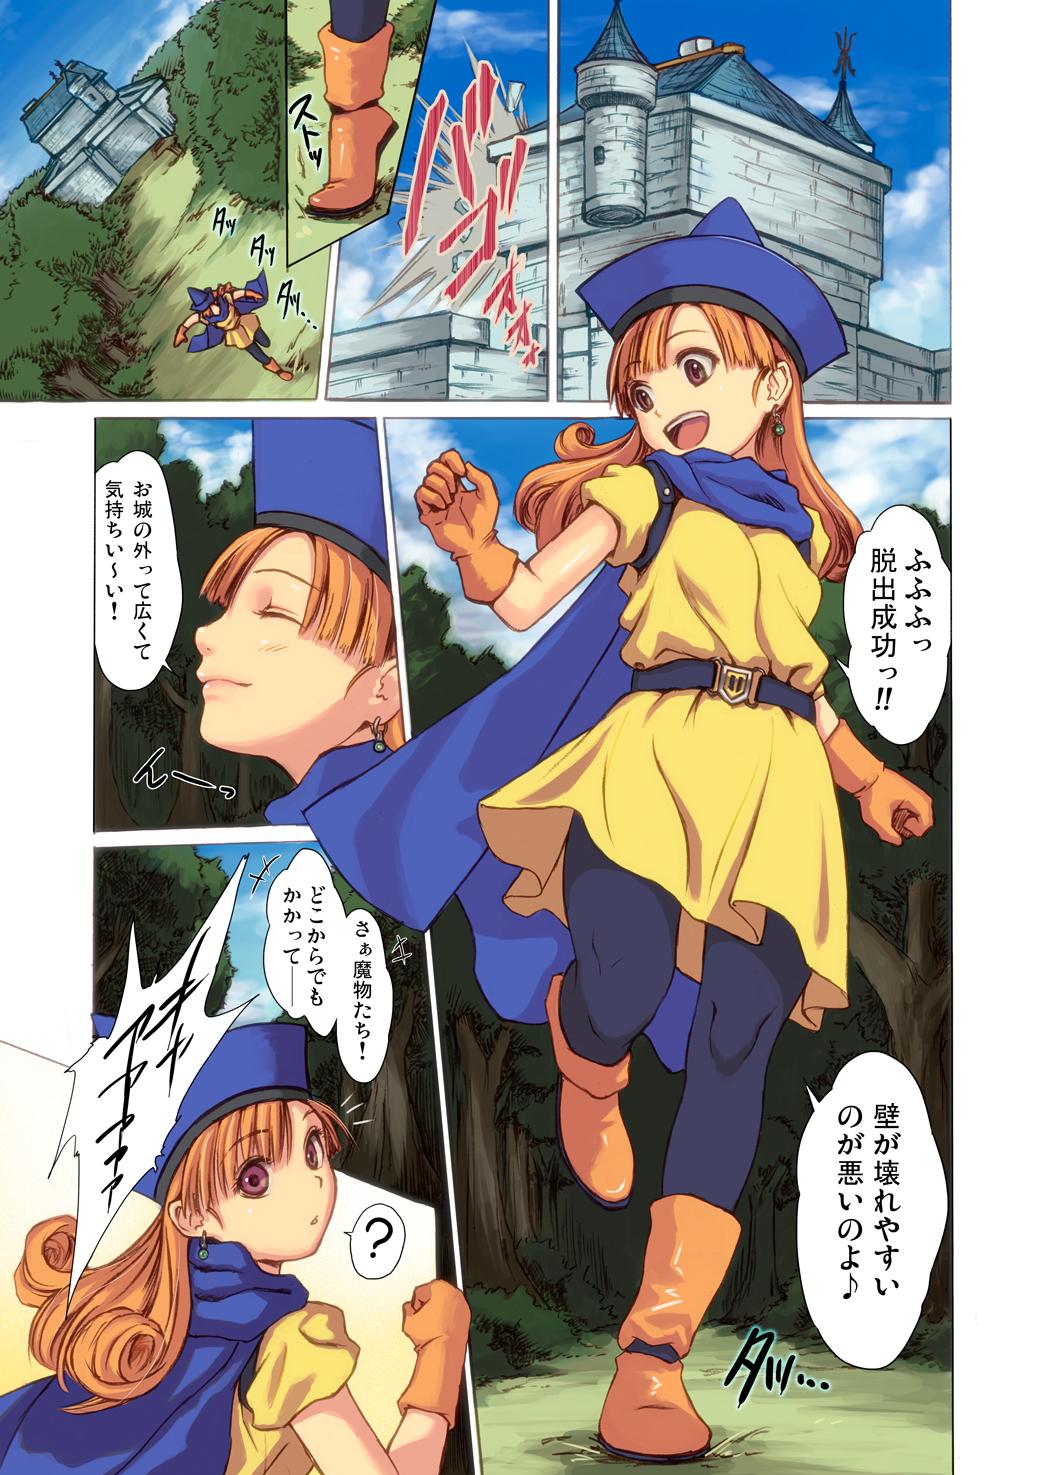 Blows Tomboy Princess - Dragon quest iv Girl Gets Fucked - Page 3